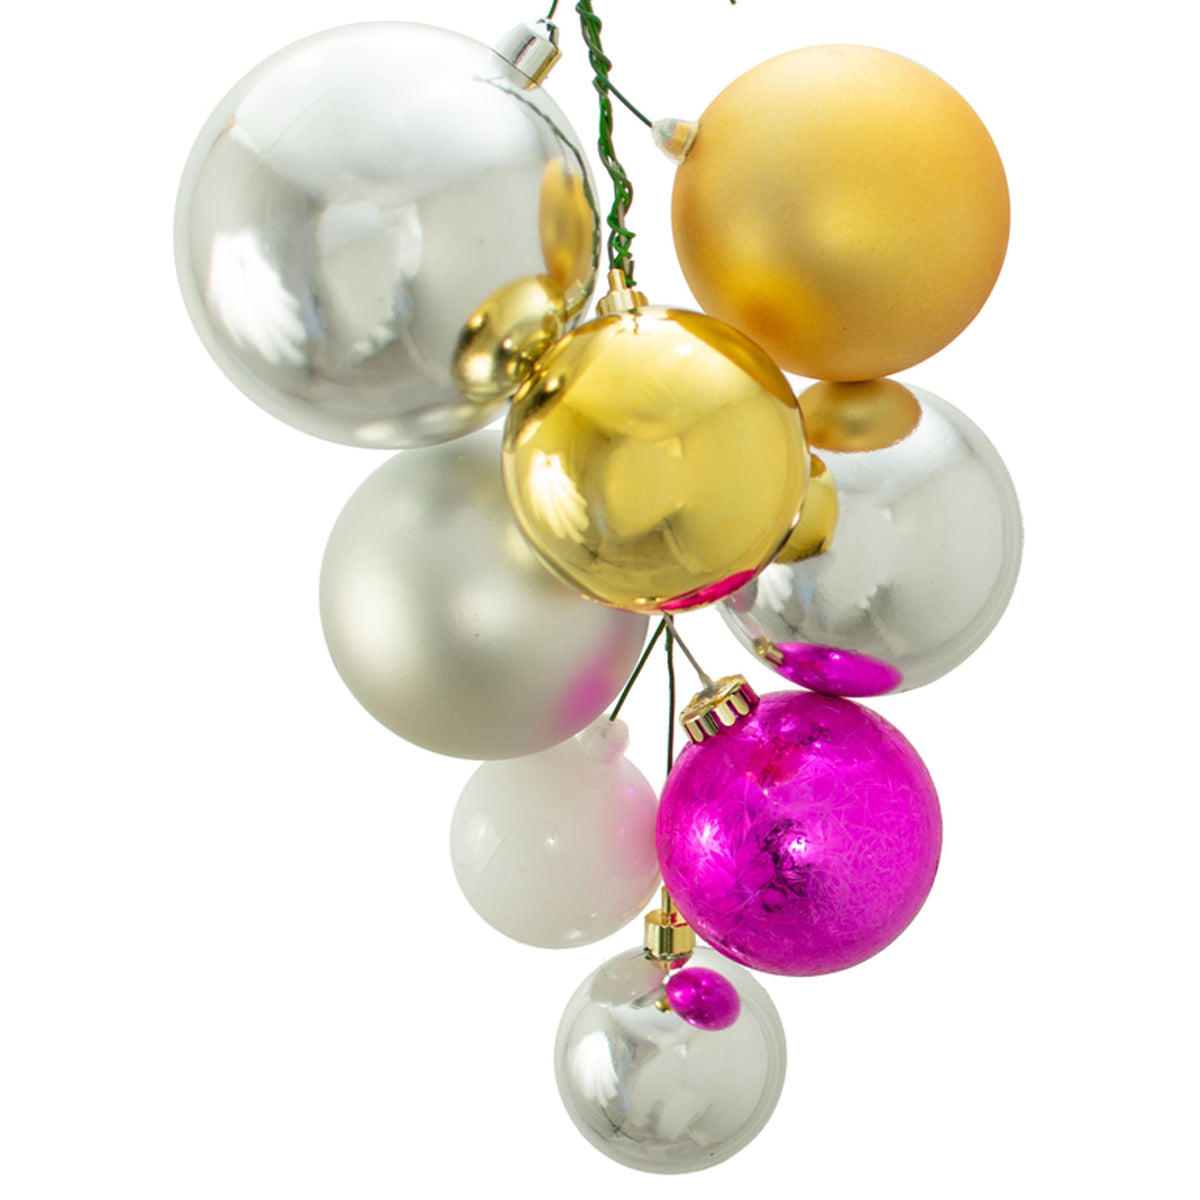 Decorate your Christmas Tree, Garlands, and Wreaths easier and quicker than ever with Lee Display's Berkeley Style Ball Cluster